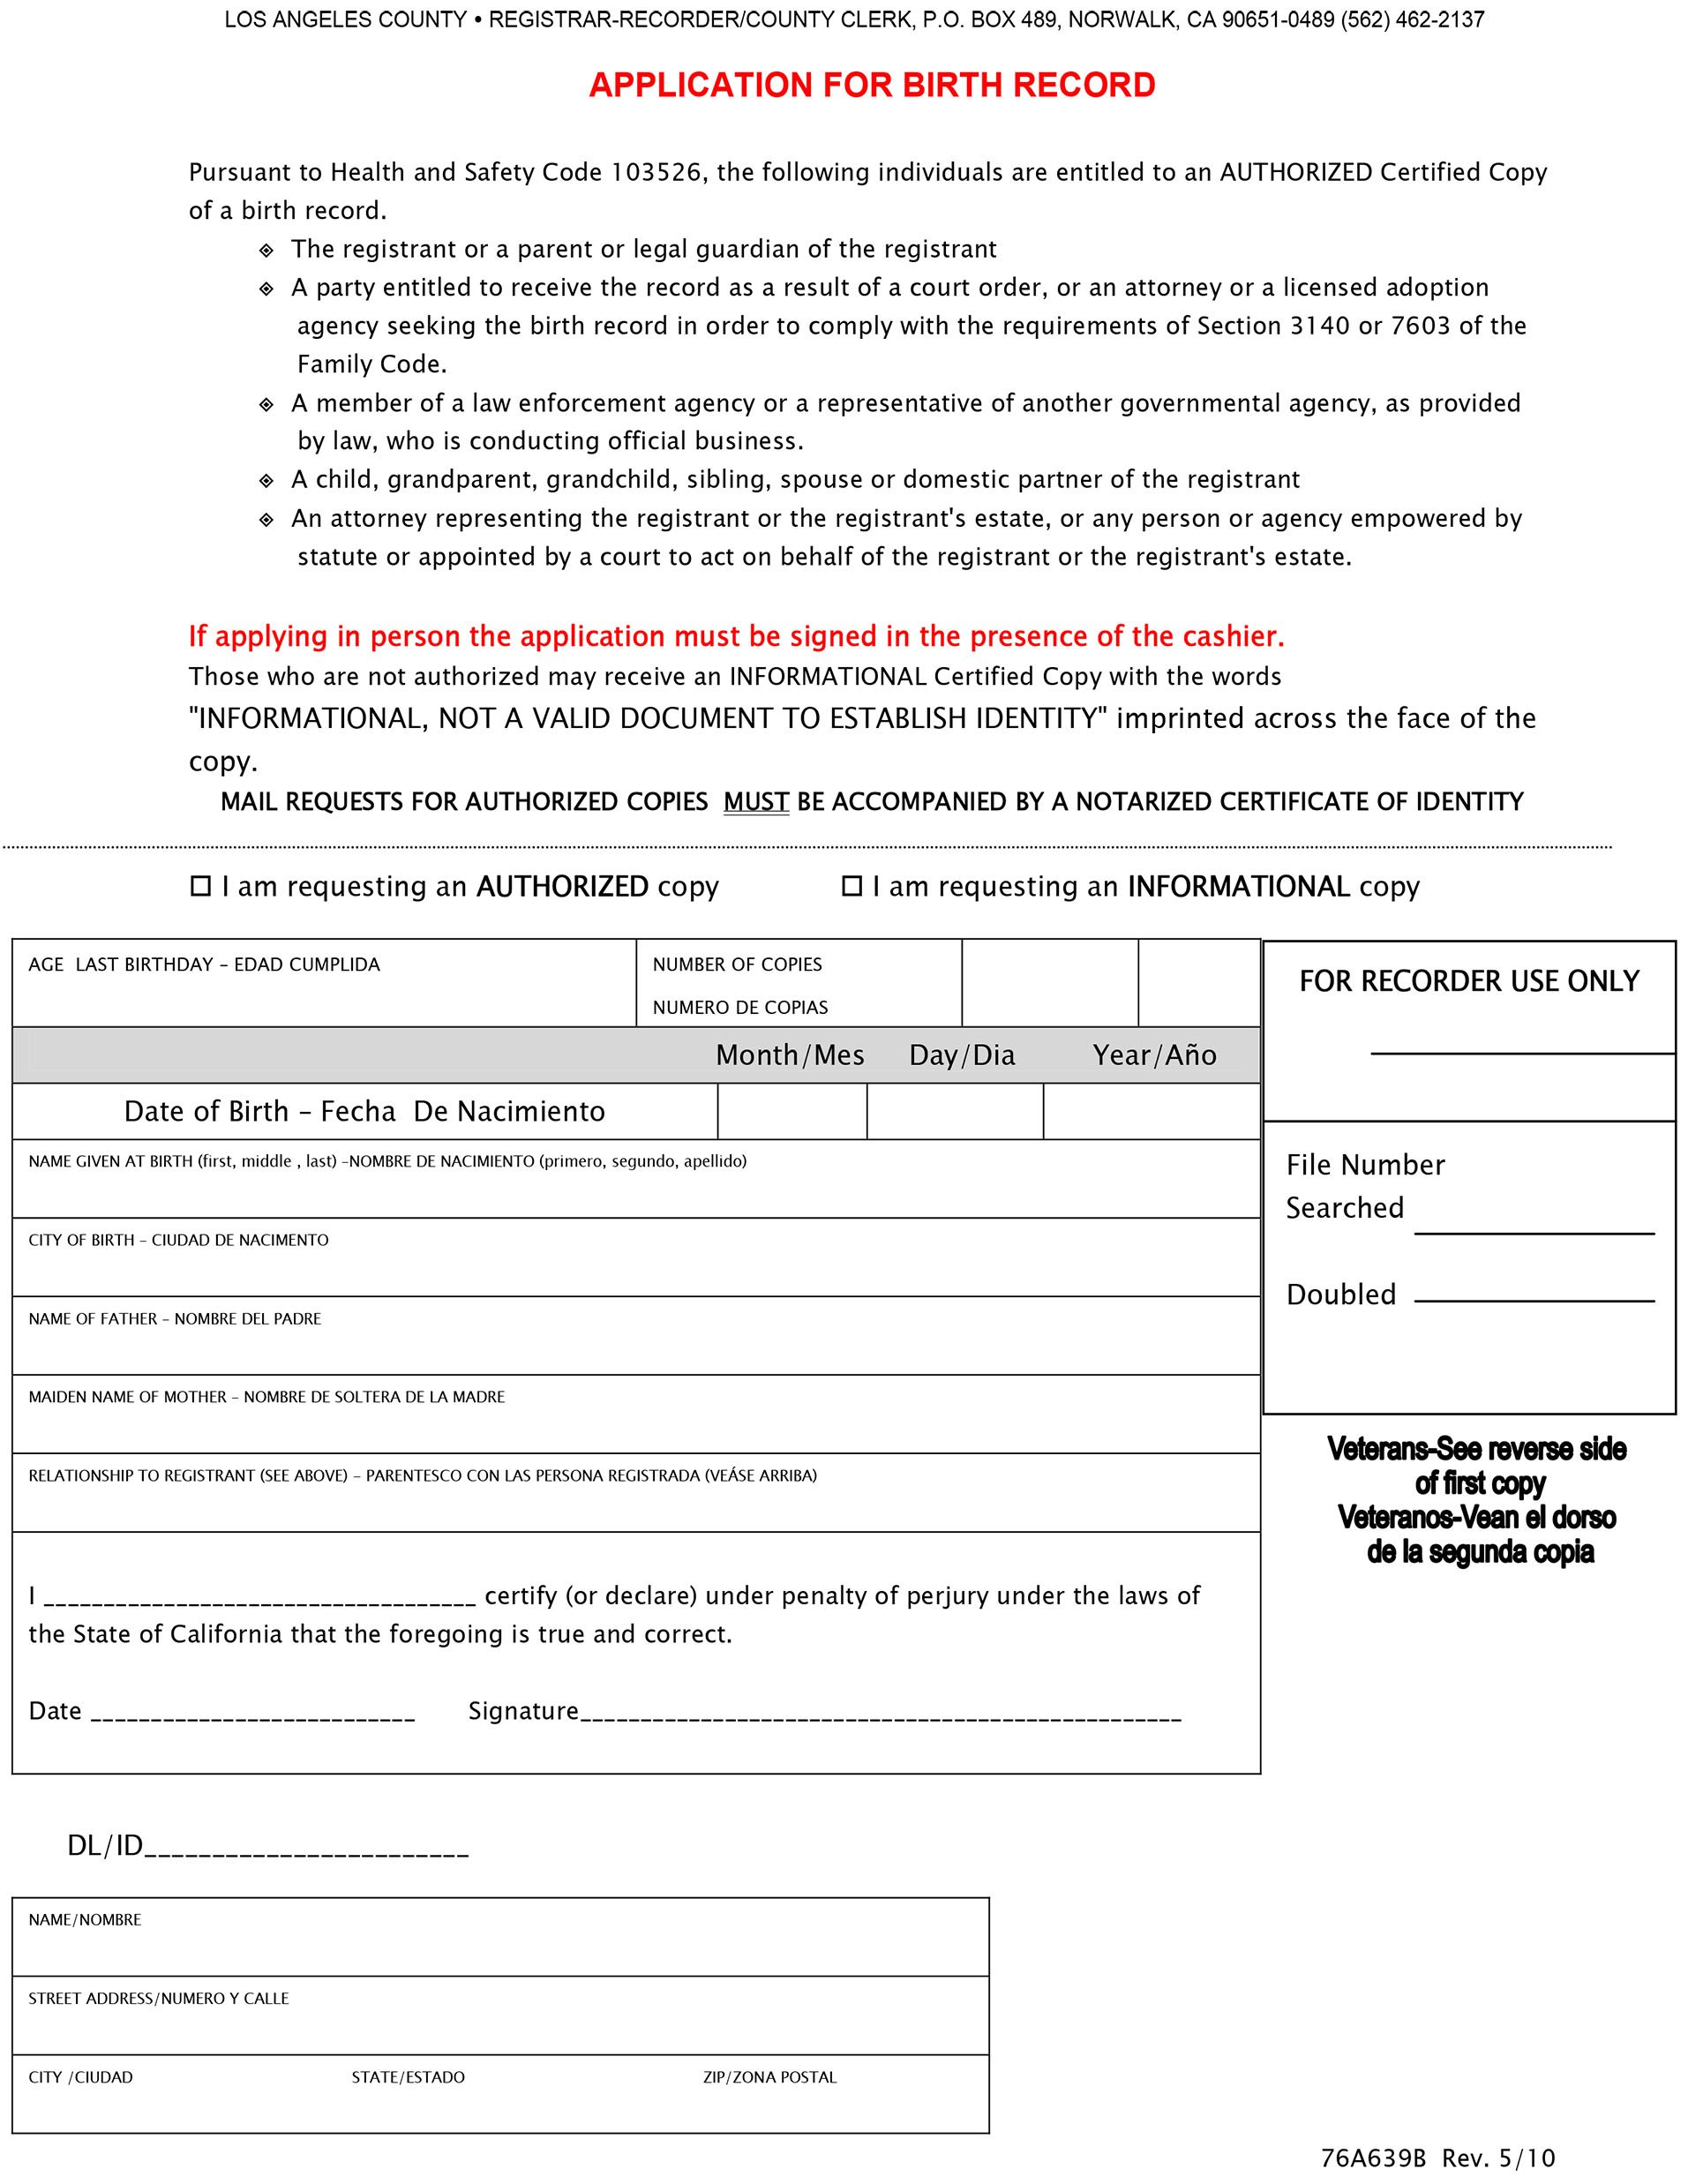 Italian citizenship requirements - Application for Birth Records